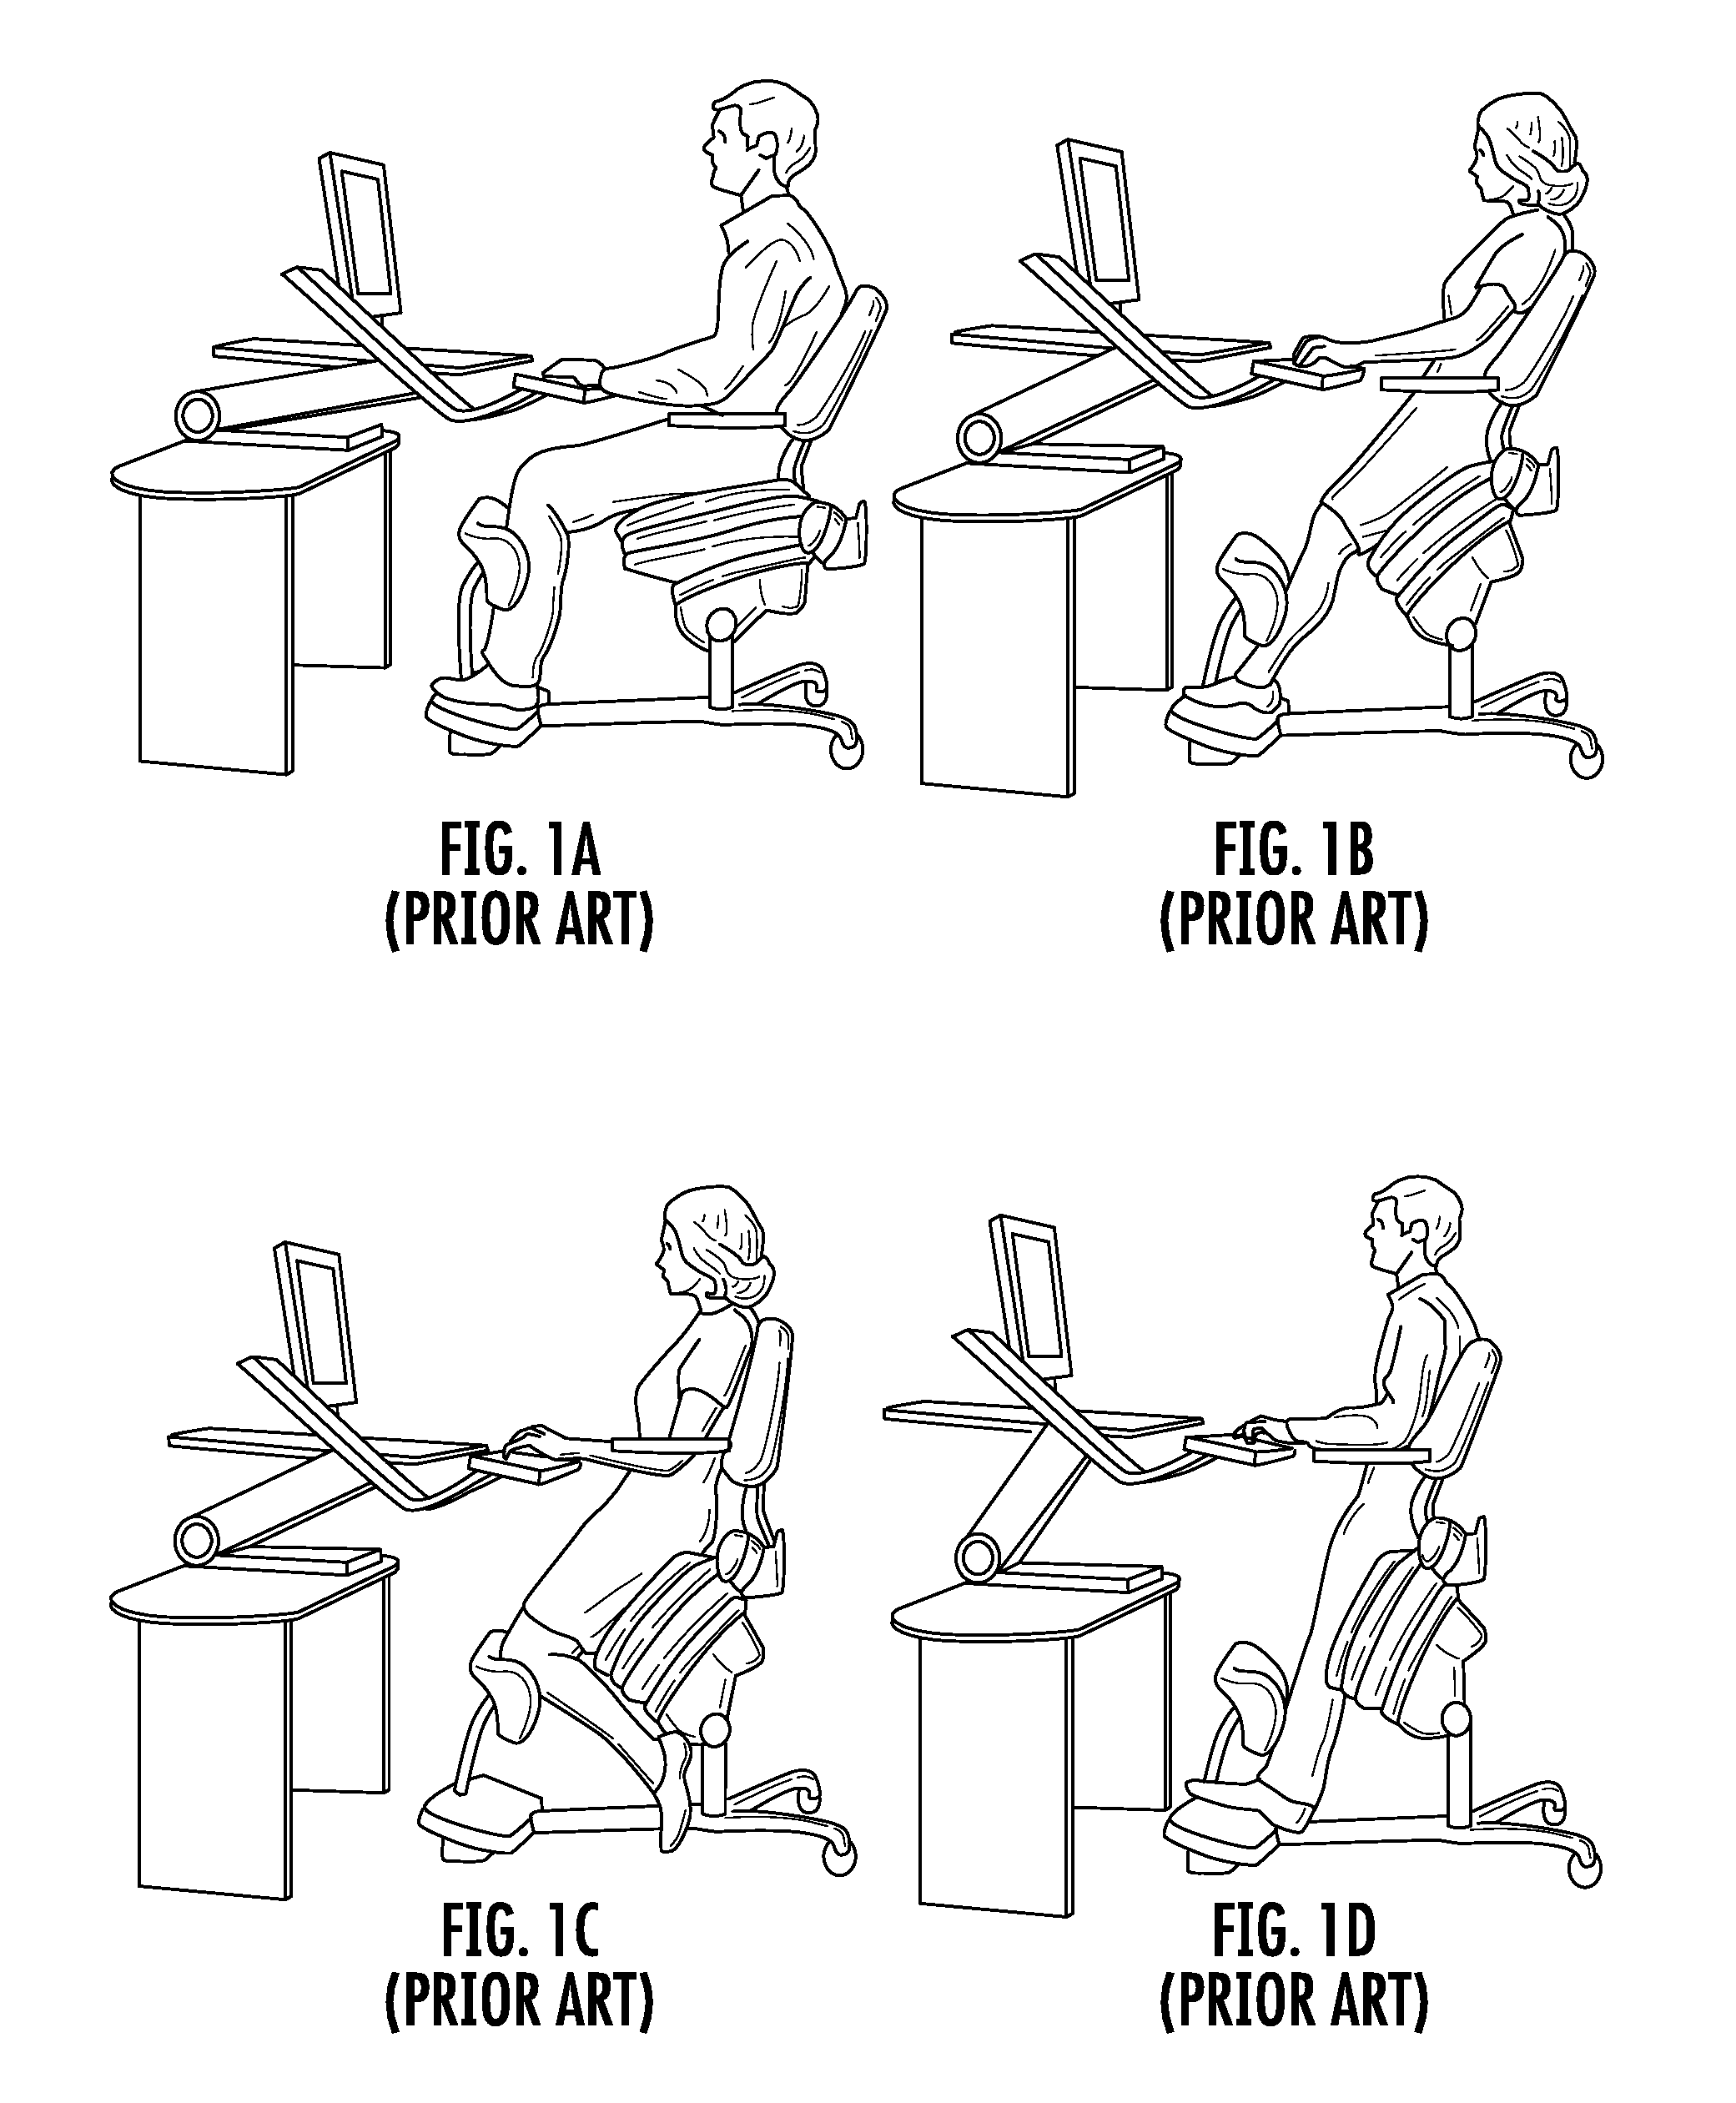 Upright active-sitting seat